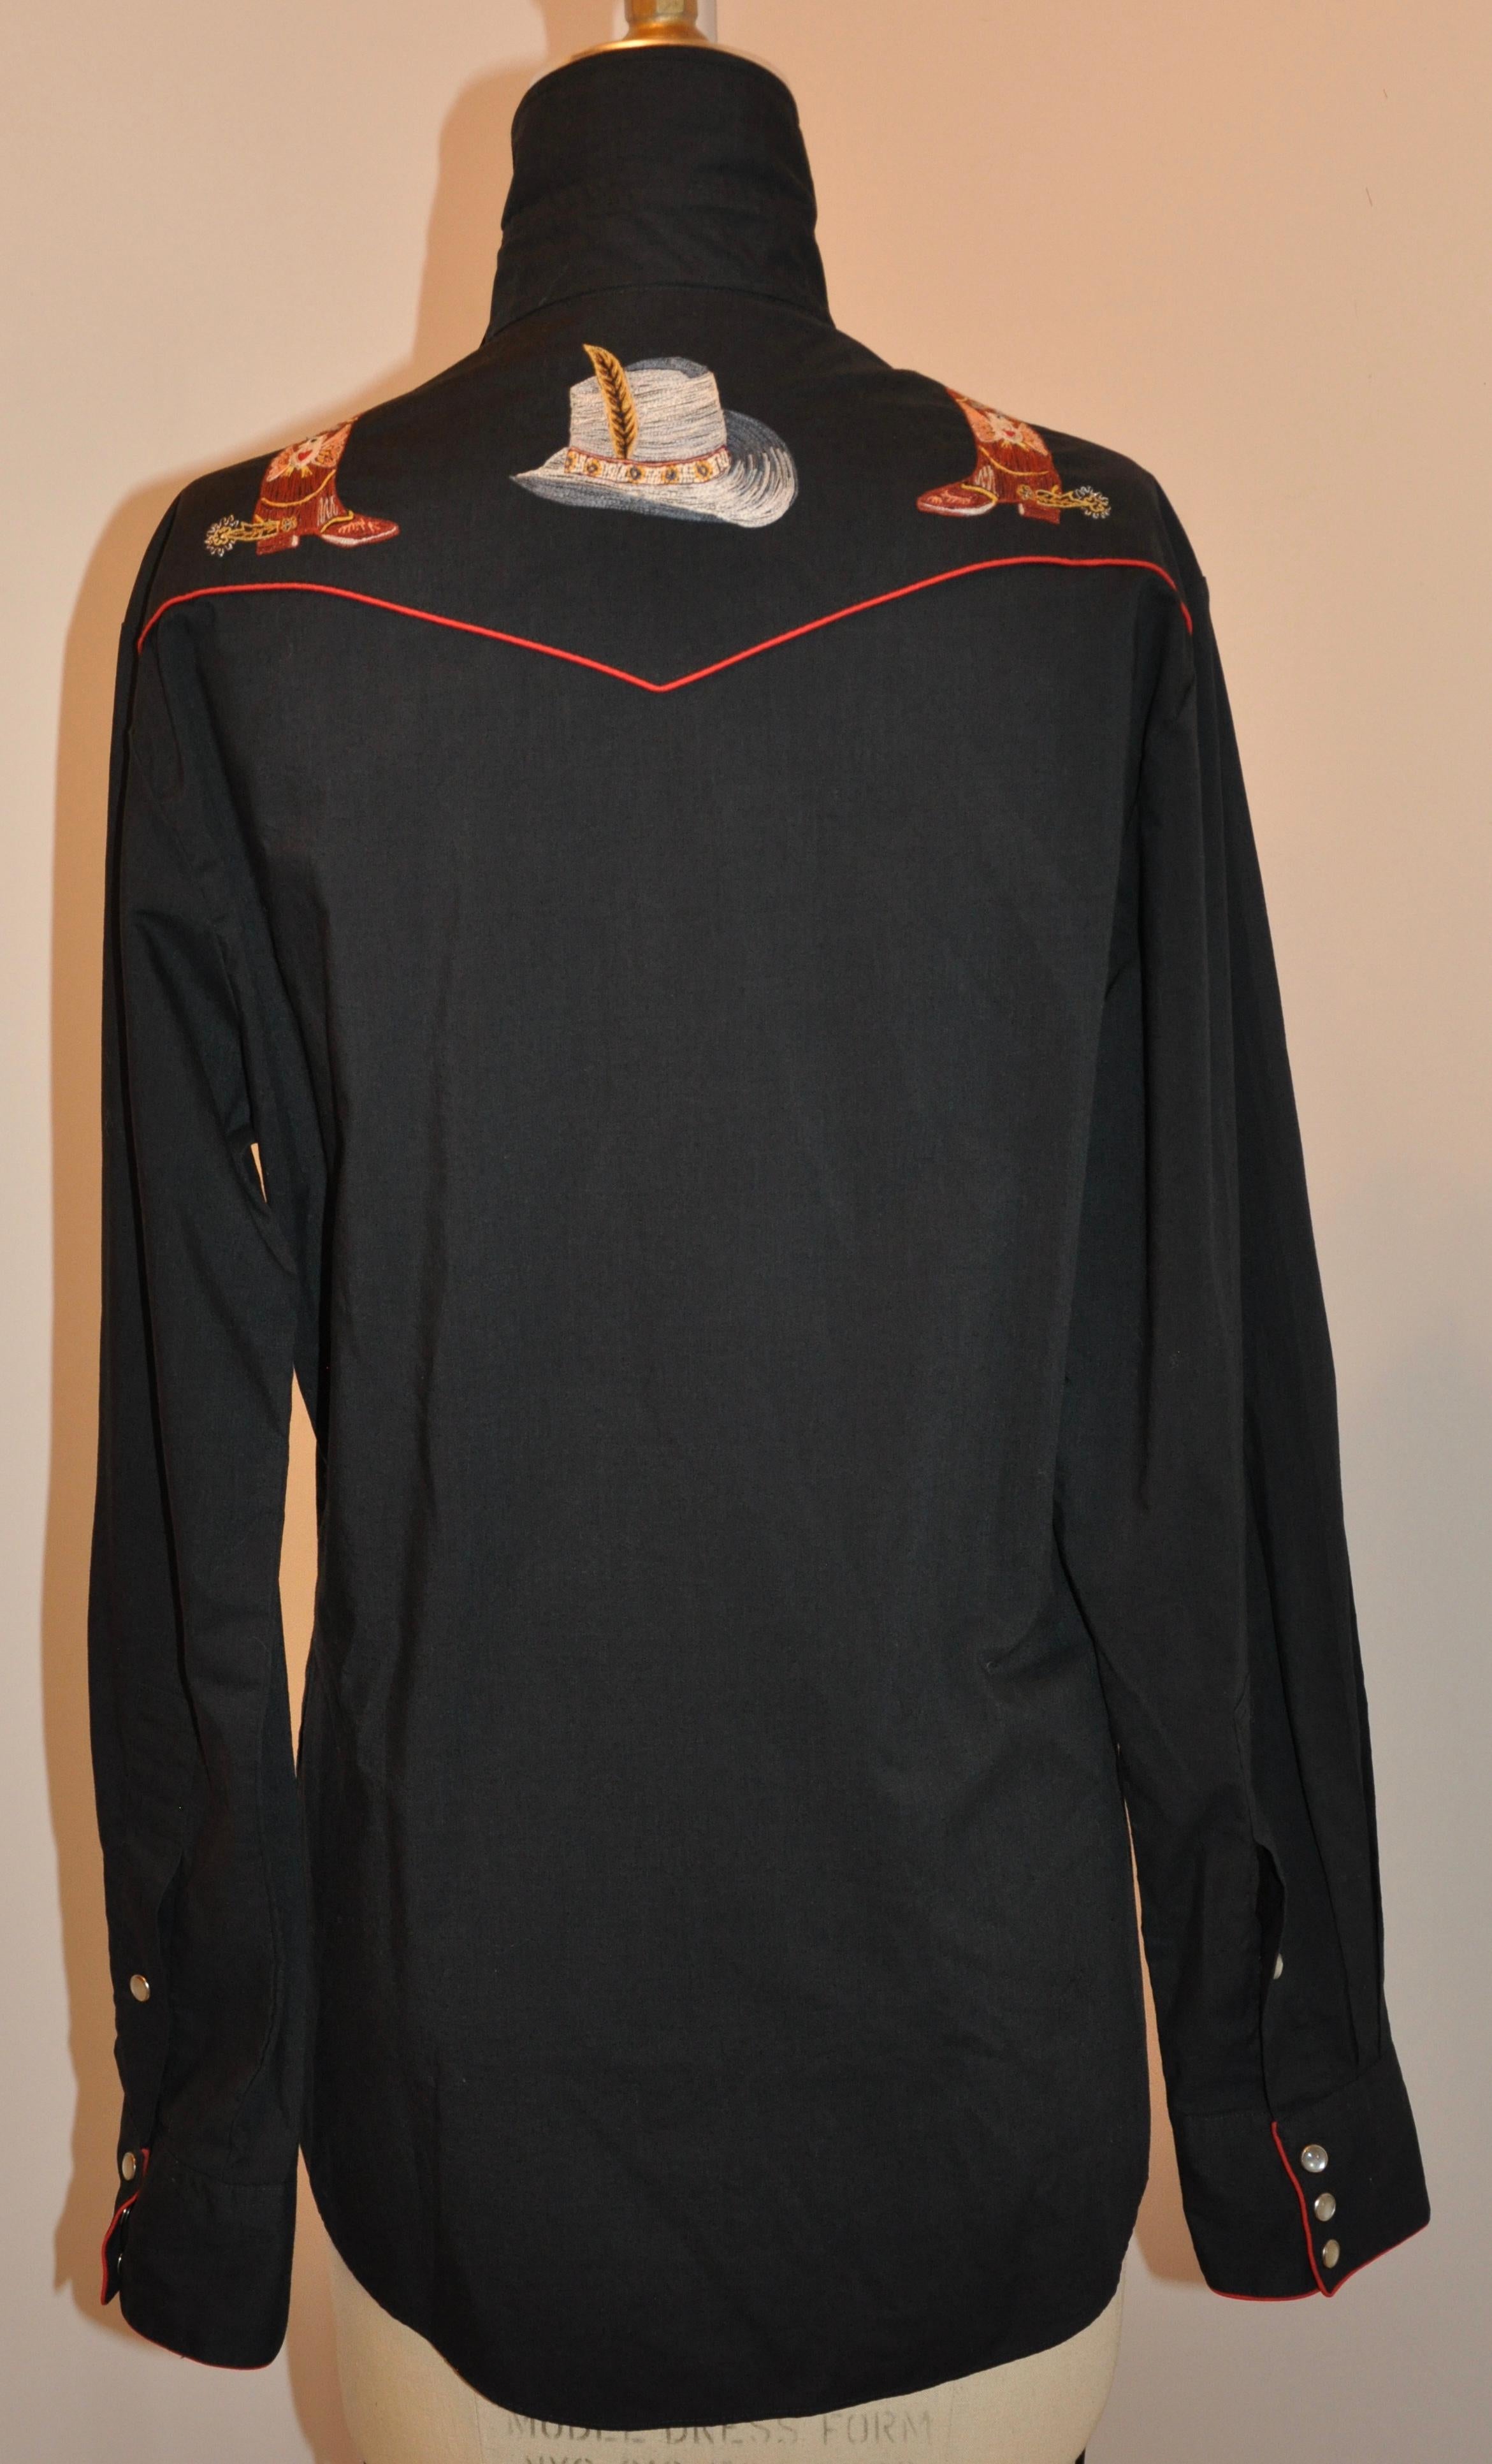     Wonderfully detailed, Kennington tapered Rocking Ranch  black cotton shirt is accented with red piping and highlighted with detailed embroidering. Instead of buttons, the shirt has 